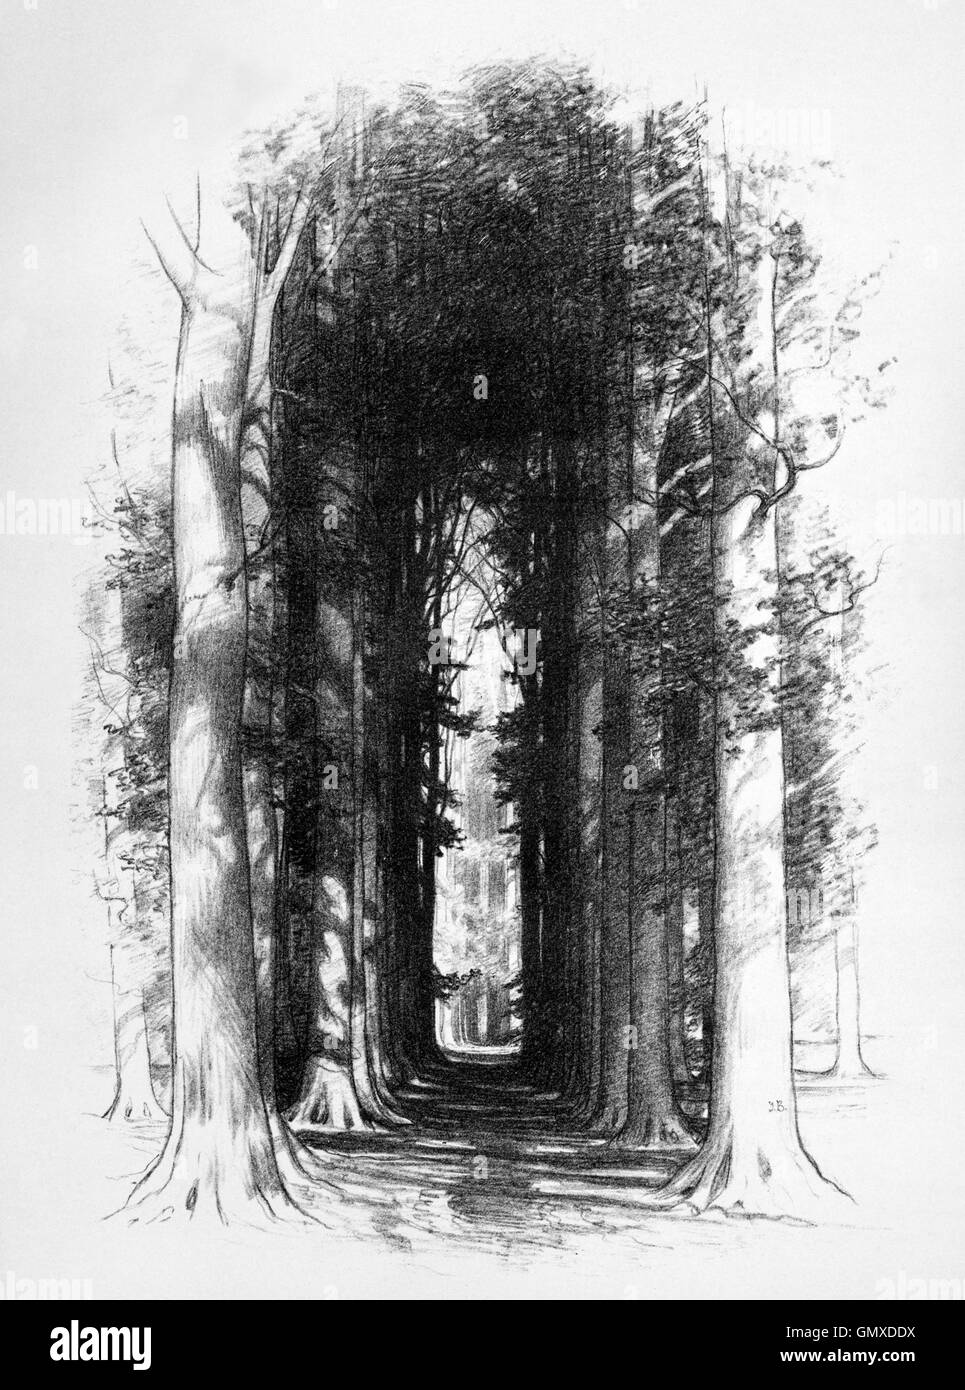 Glade in Binning Wood at Tyninghame in  East Lothian, Scotland. (From 'Sketches in East Lothian' by Thomas B. Blacklock...1892) Stock Photo